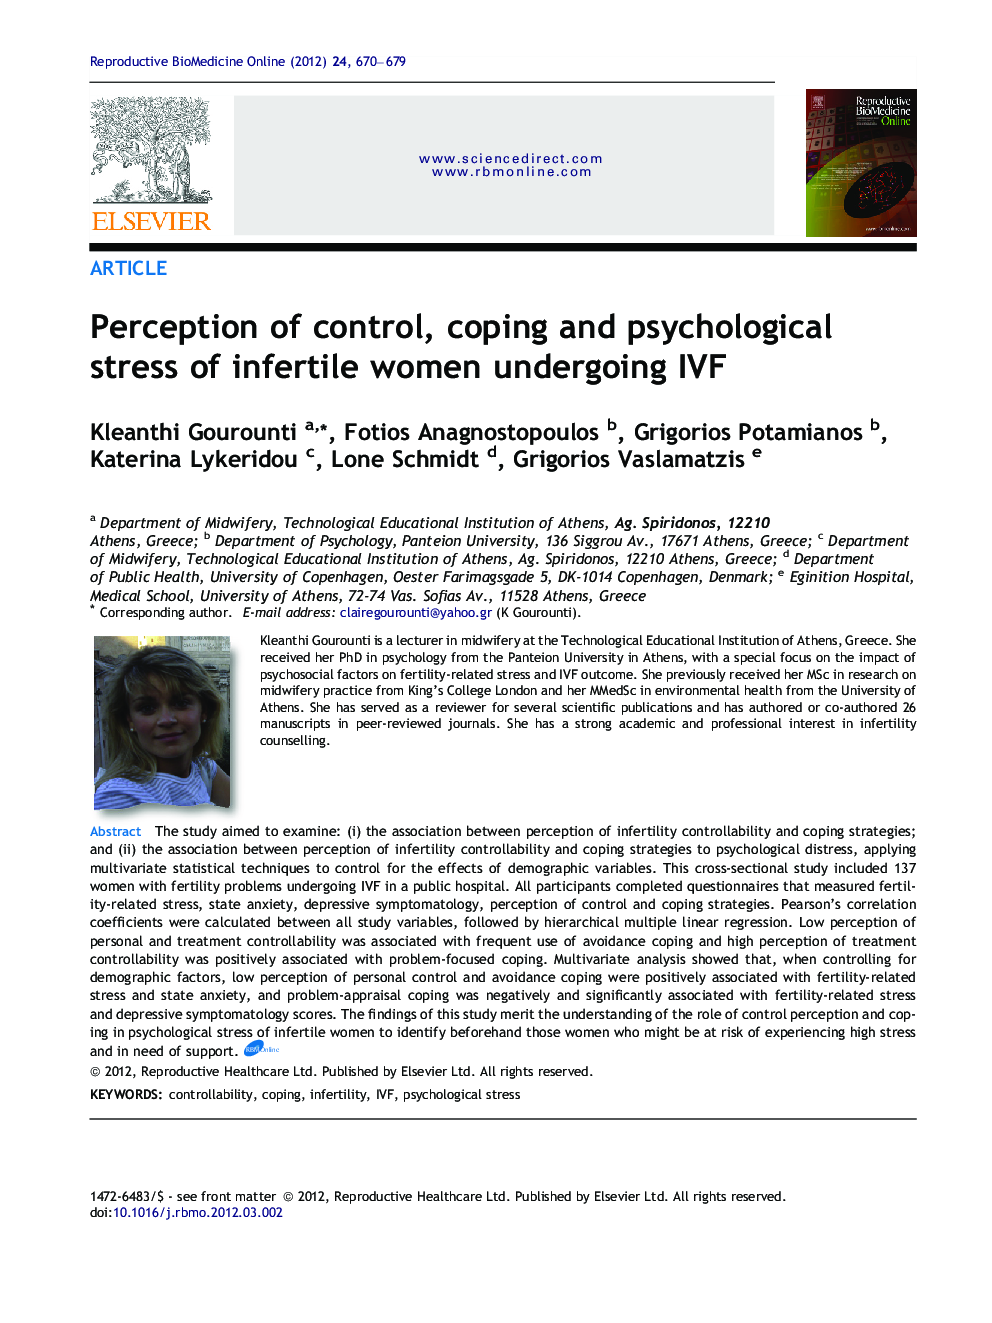 Perception of control, coping and psychological stress of infertile women undergoing IVF 